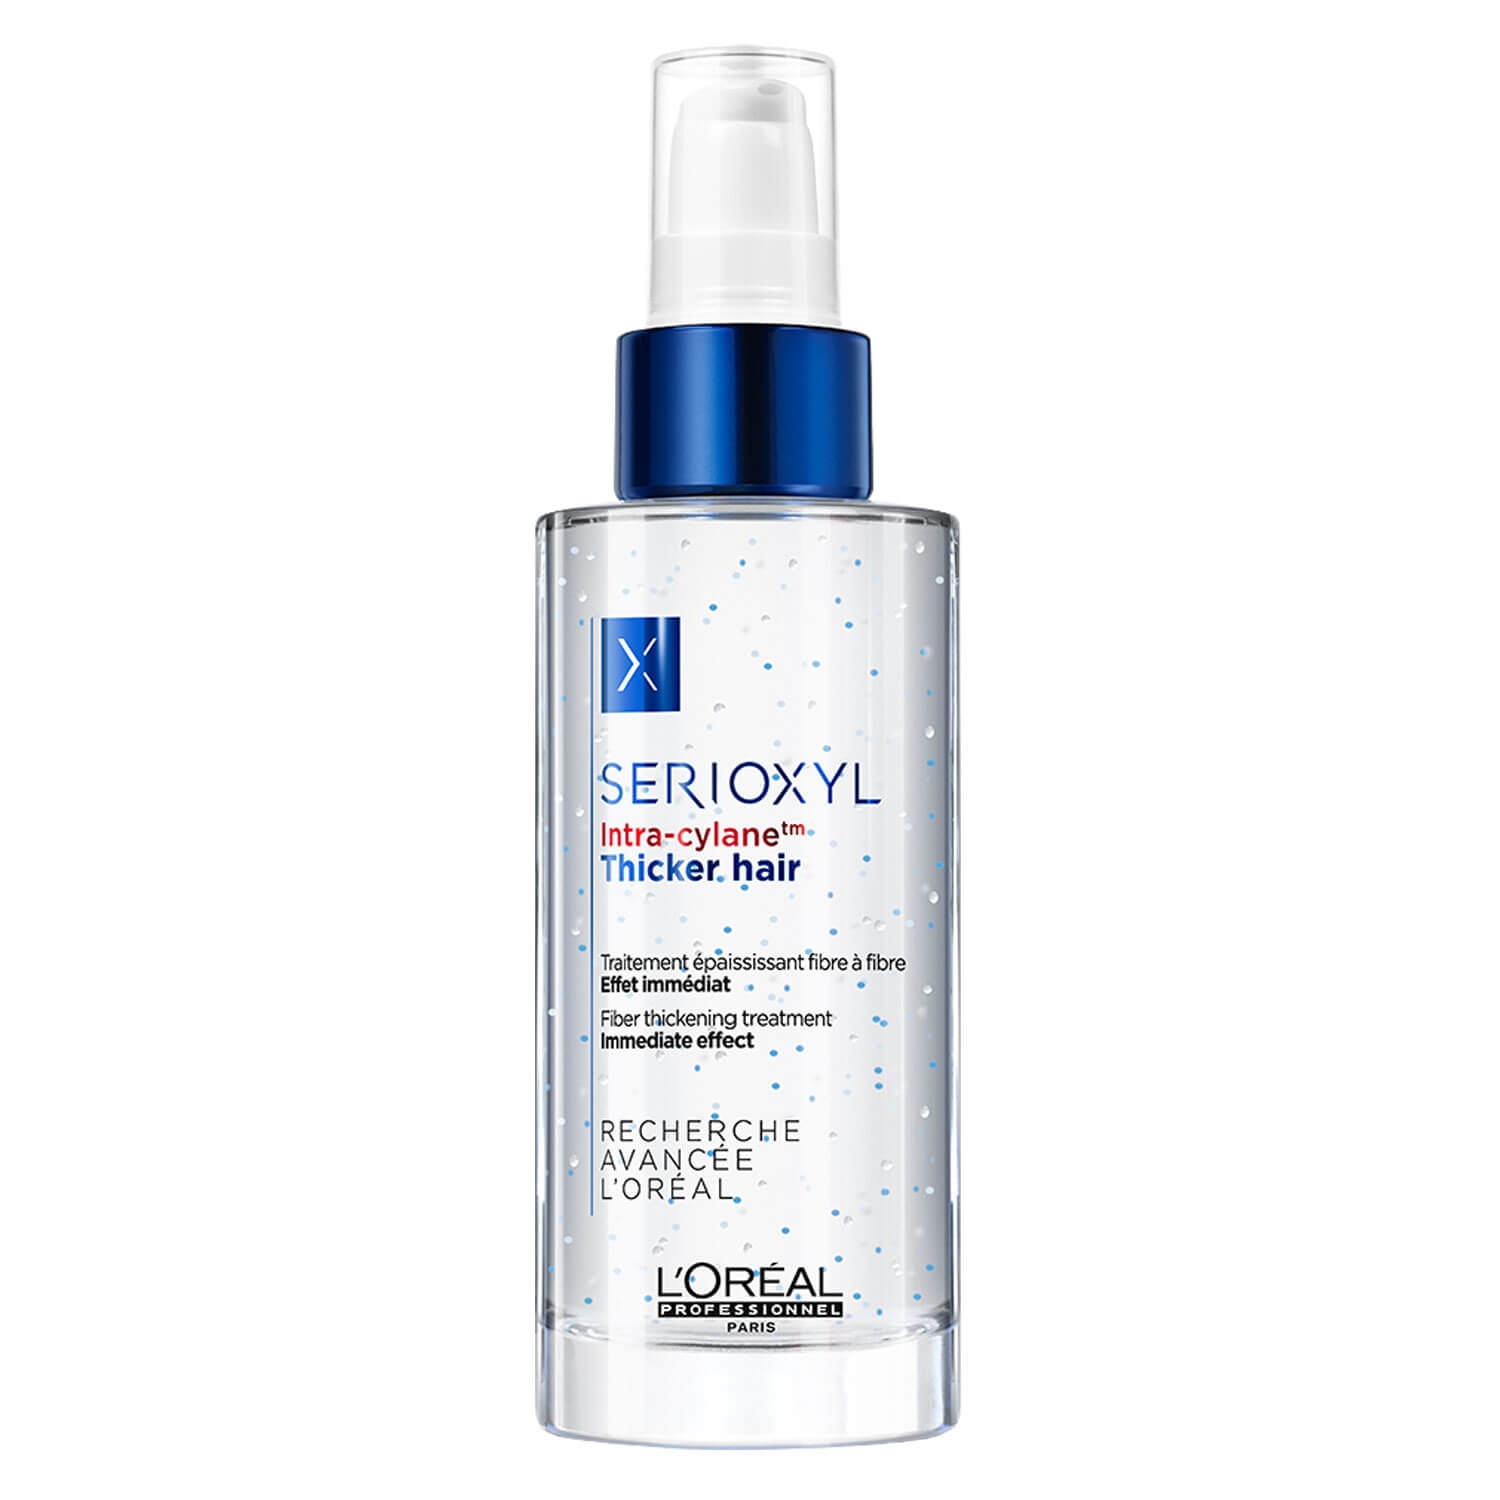 Product image from Serioxyl - Serum Thicker Hair Intra-Cylane